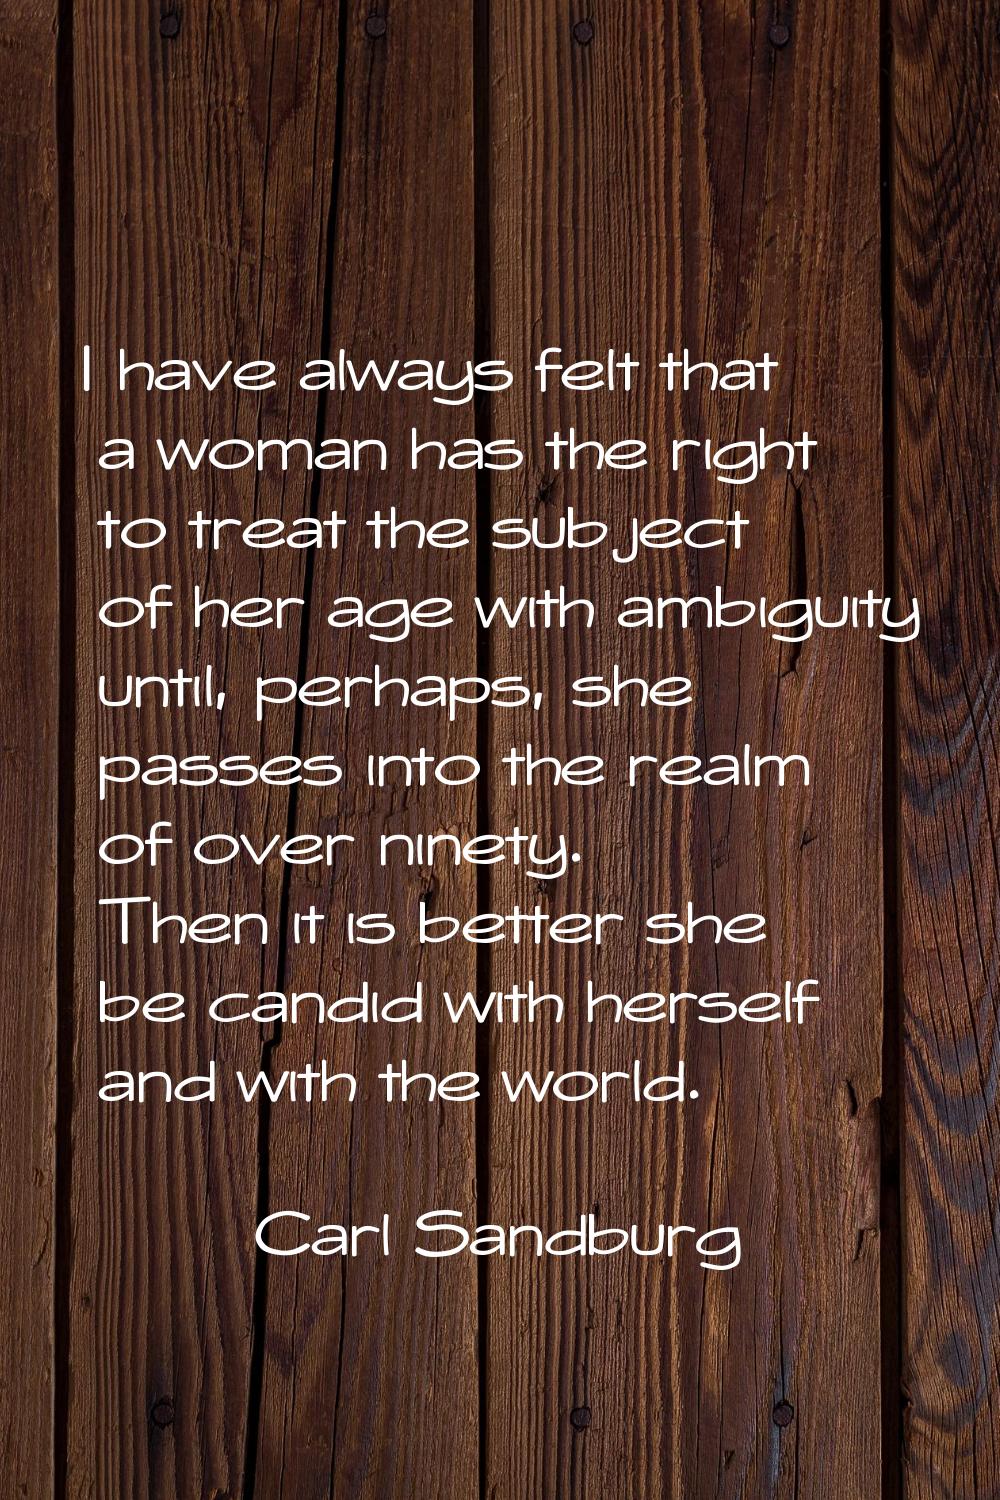 I have always felt that a woman has the right to treat the subject of her age with ambiguity until,